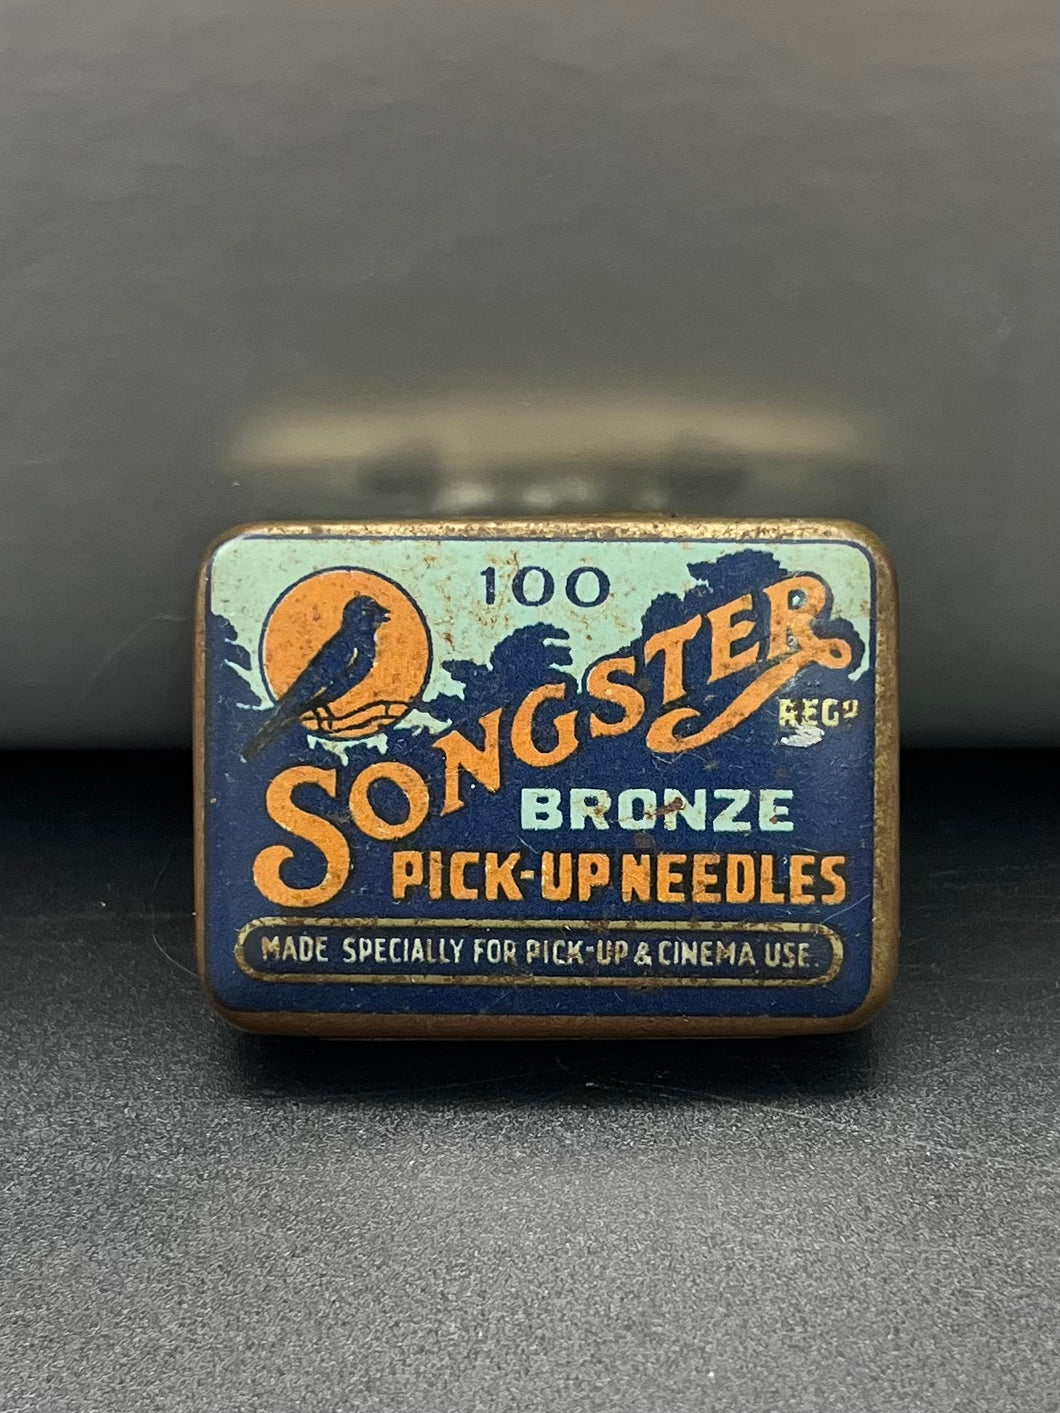 Songster Bronze Pick-Up Needle Tin with Contents